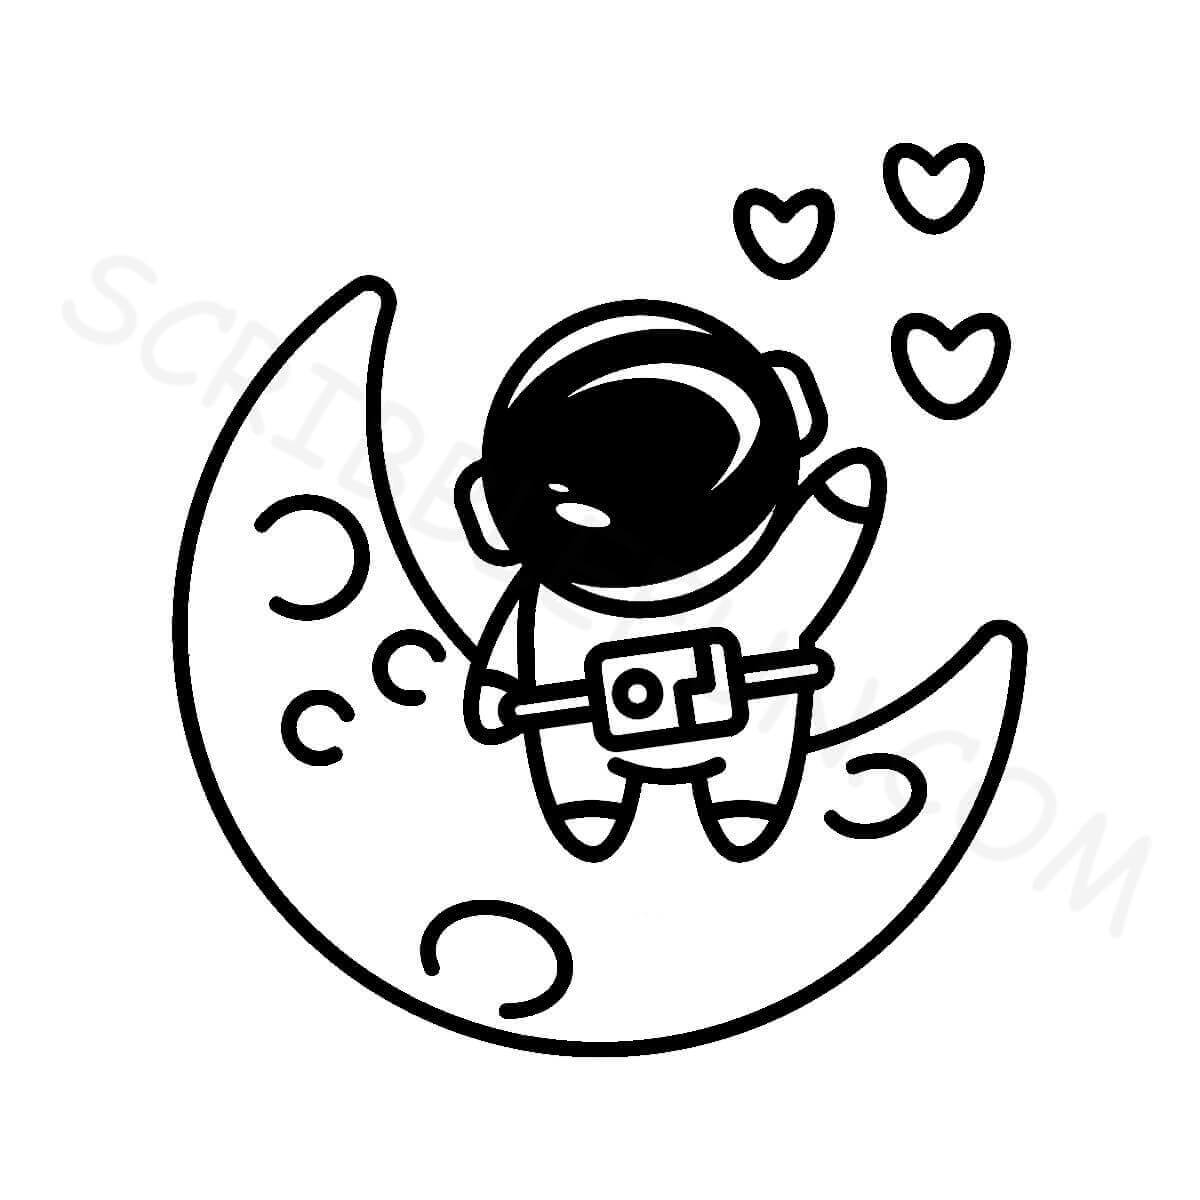 Astronaut sitting on a moon coloring page